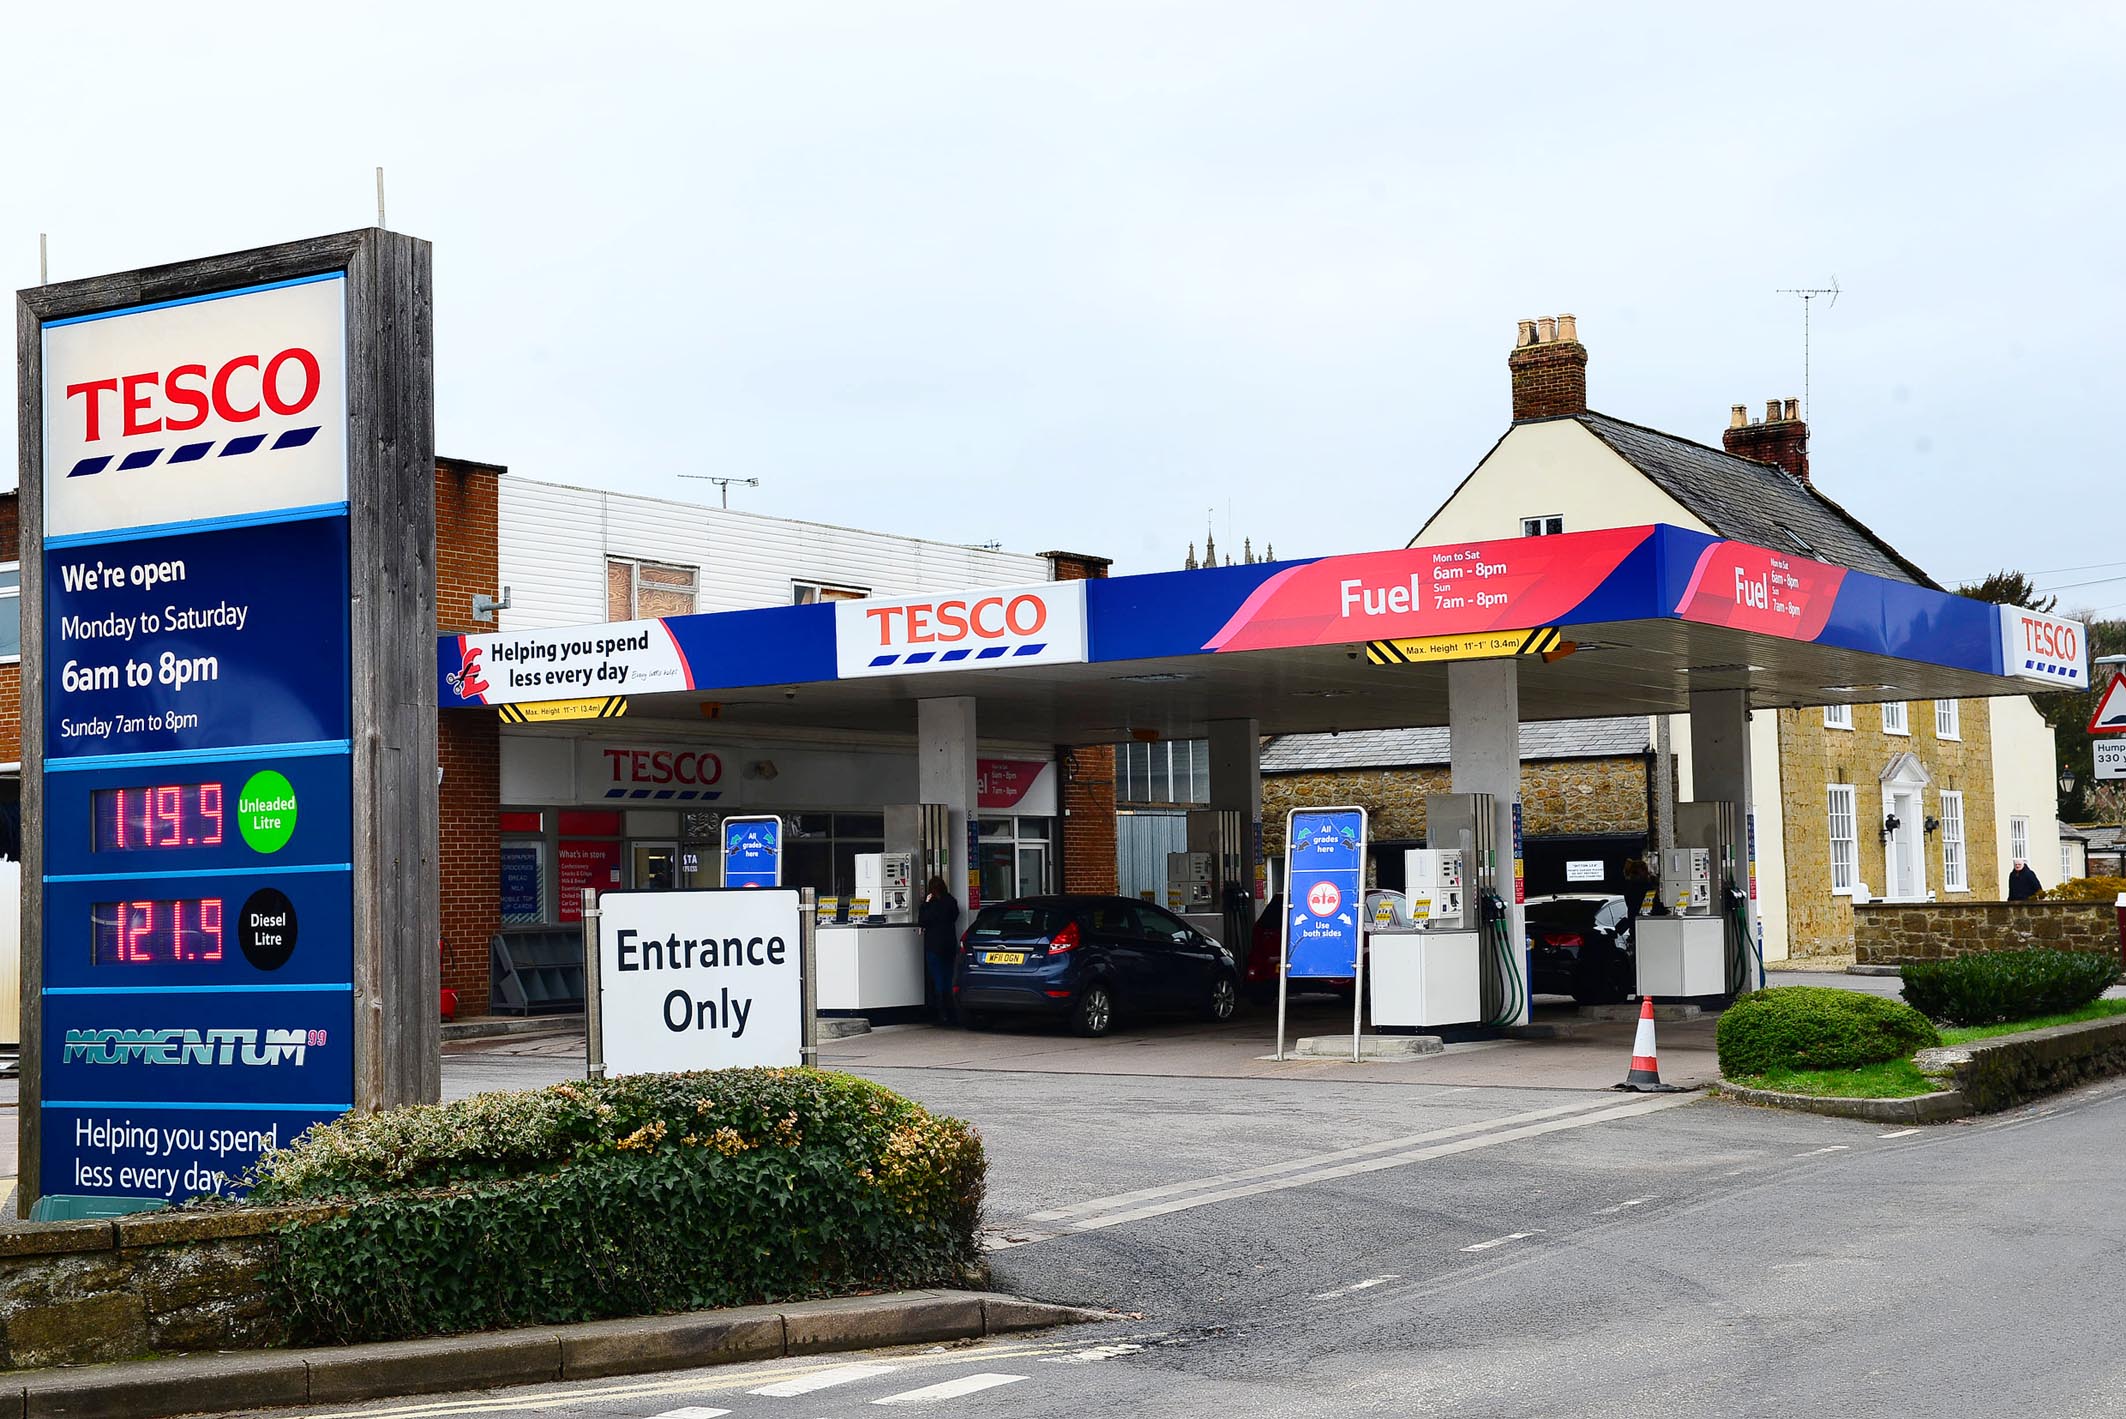 Drivers furious as Tesco starts charging drivers £99 deposit for fuel